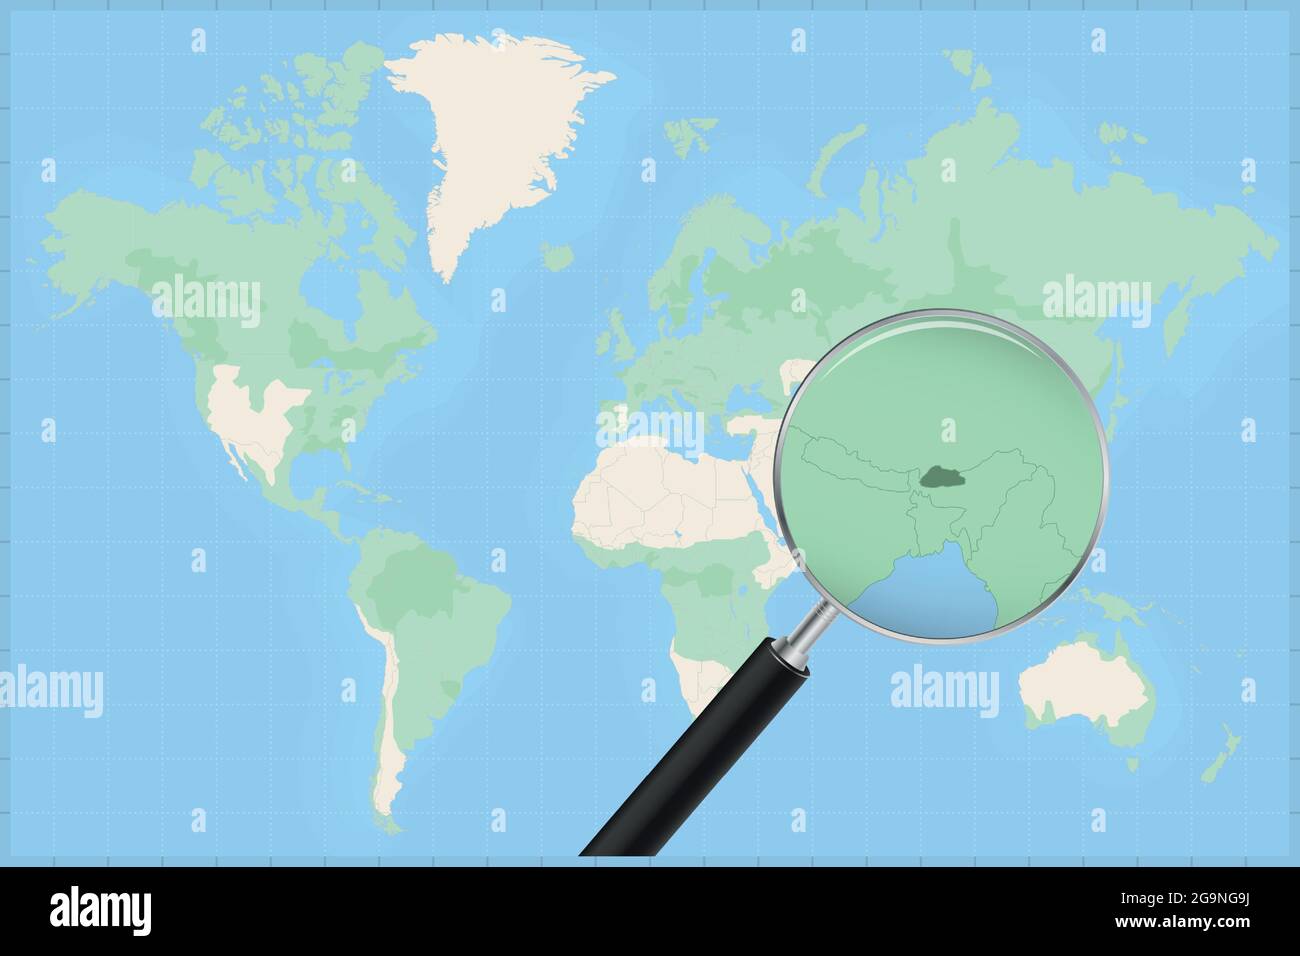 Map of the world with a magnifying glass on a map of Bhutan Detailed map of Bhutan and neighboring countries in the magnifying glass. Stock Vector